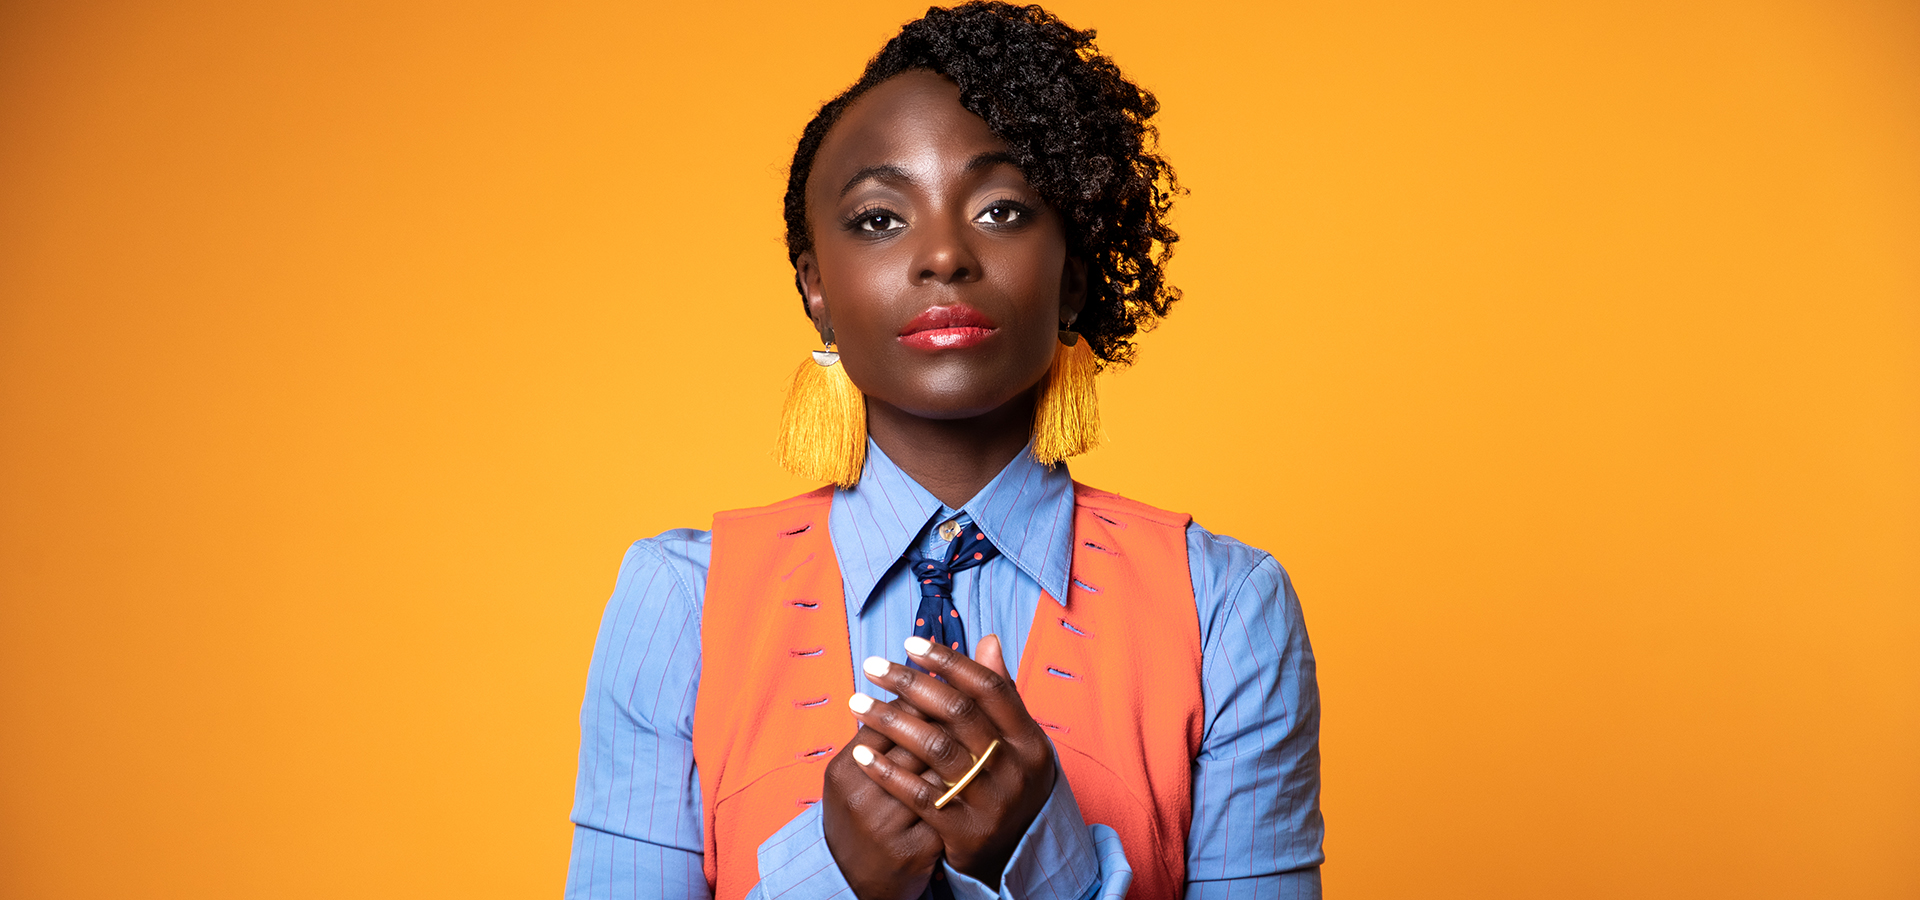 A vibrant portrait photo of artist Nathalie Joachim, a young black woman wearing a polka dot neck tie, and orange vest and orange tassle earrings.